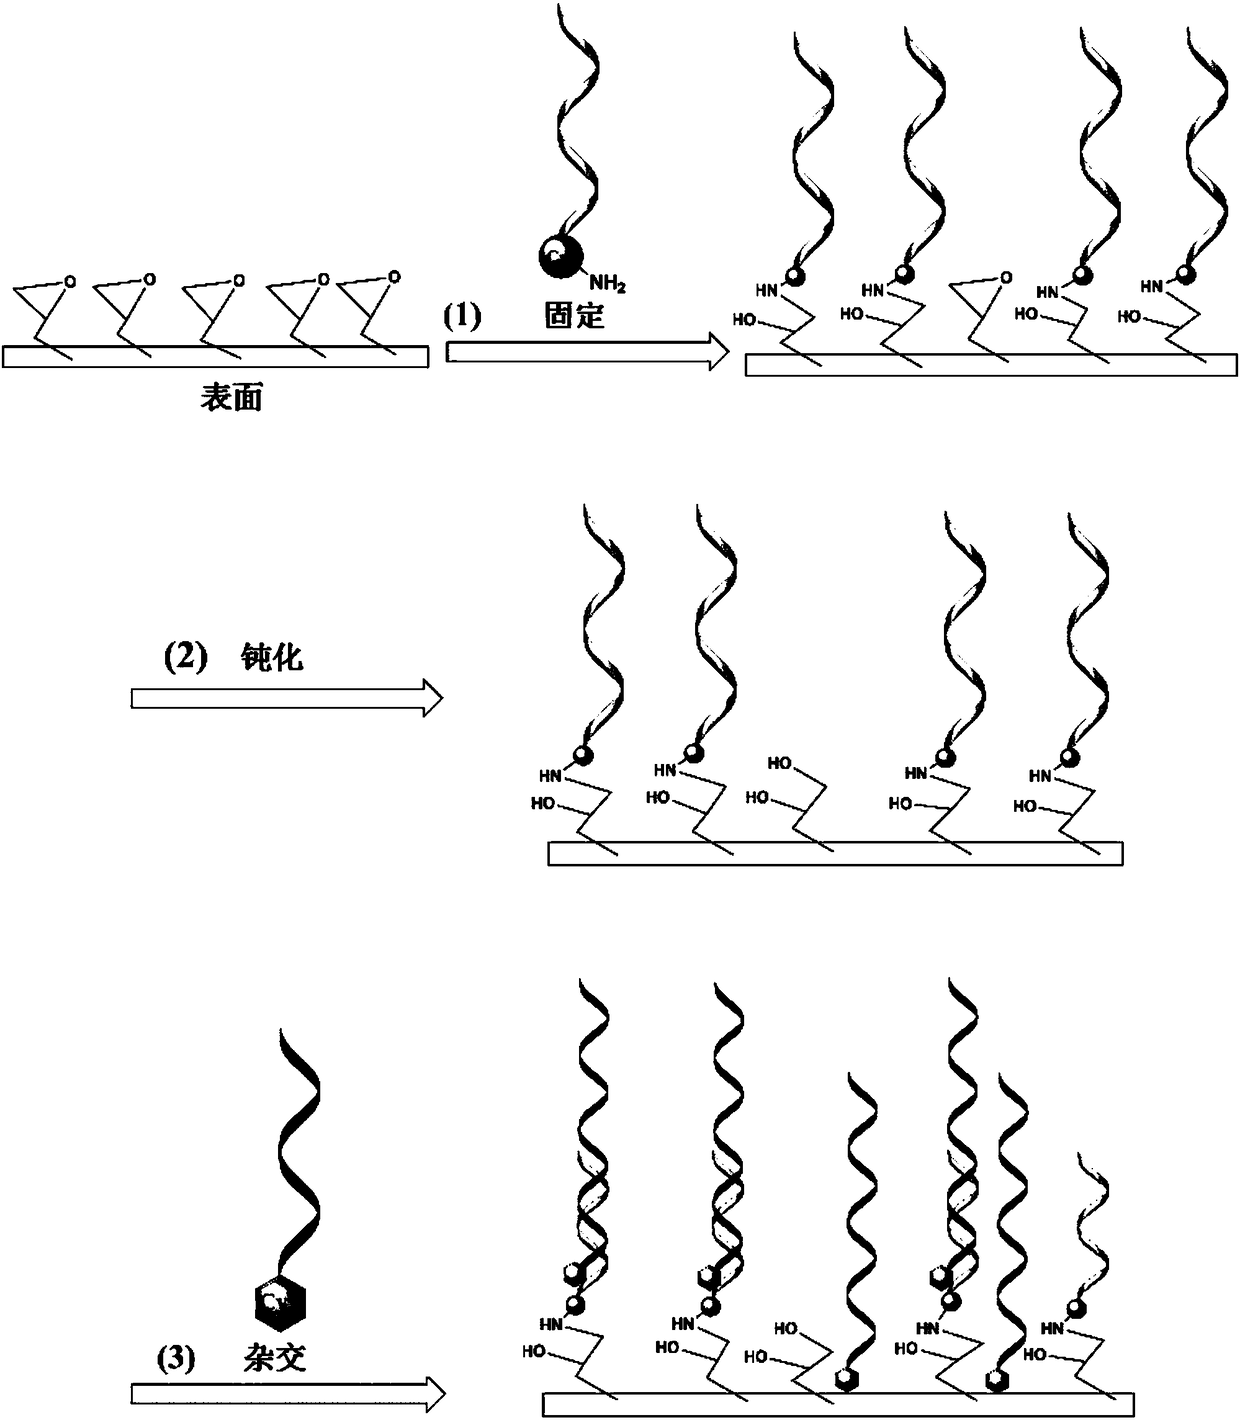 Method for detecting specific and/or non-specific adsorption of nucleic acids